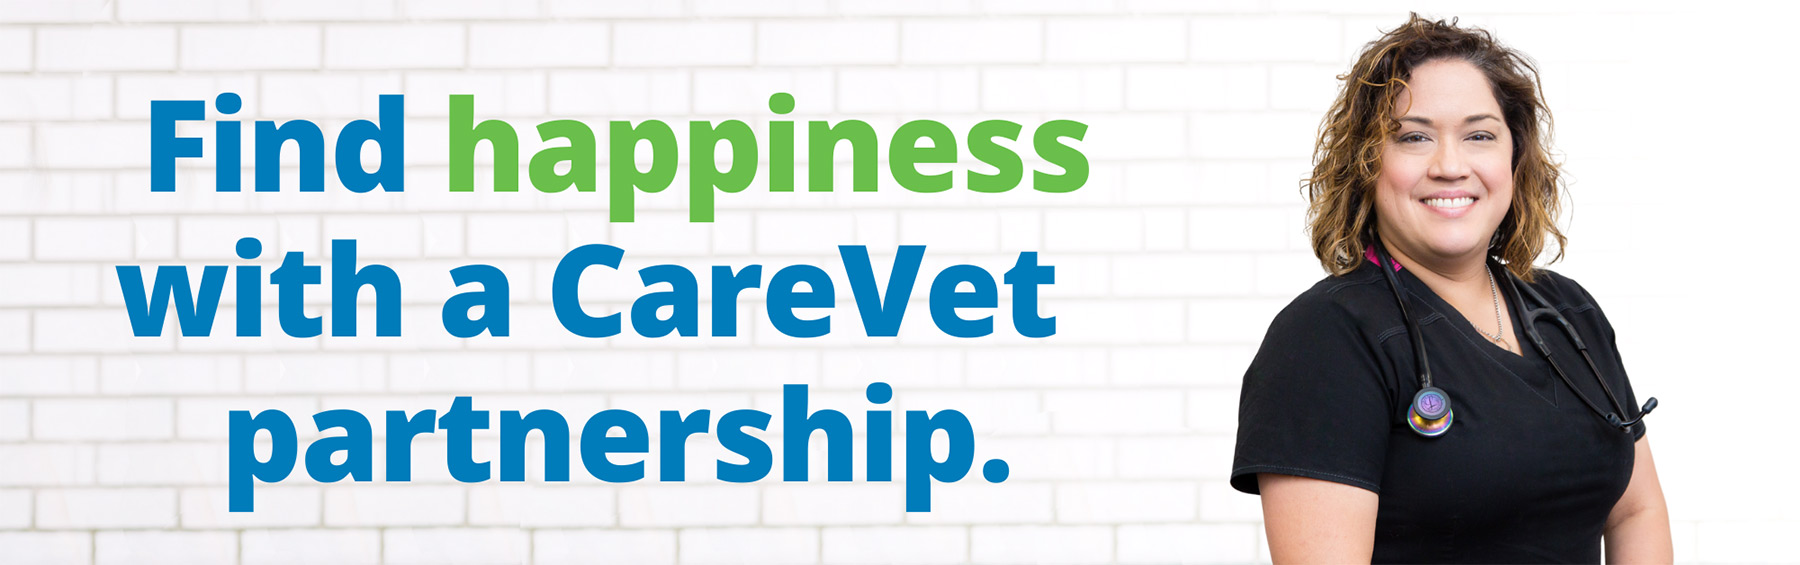 Find happiness with a CareVet partnership.